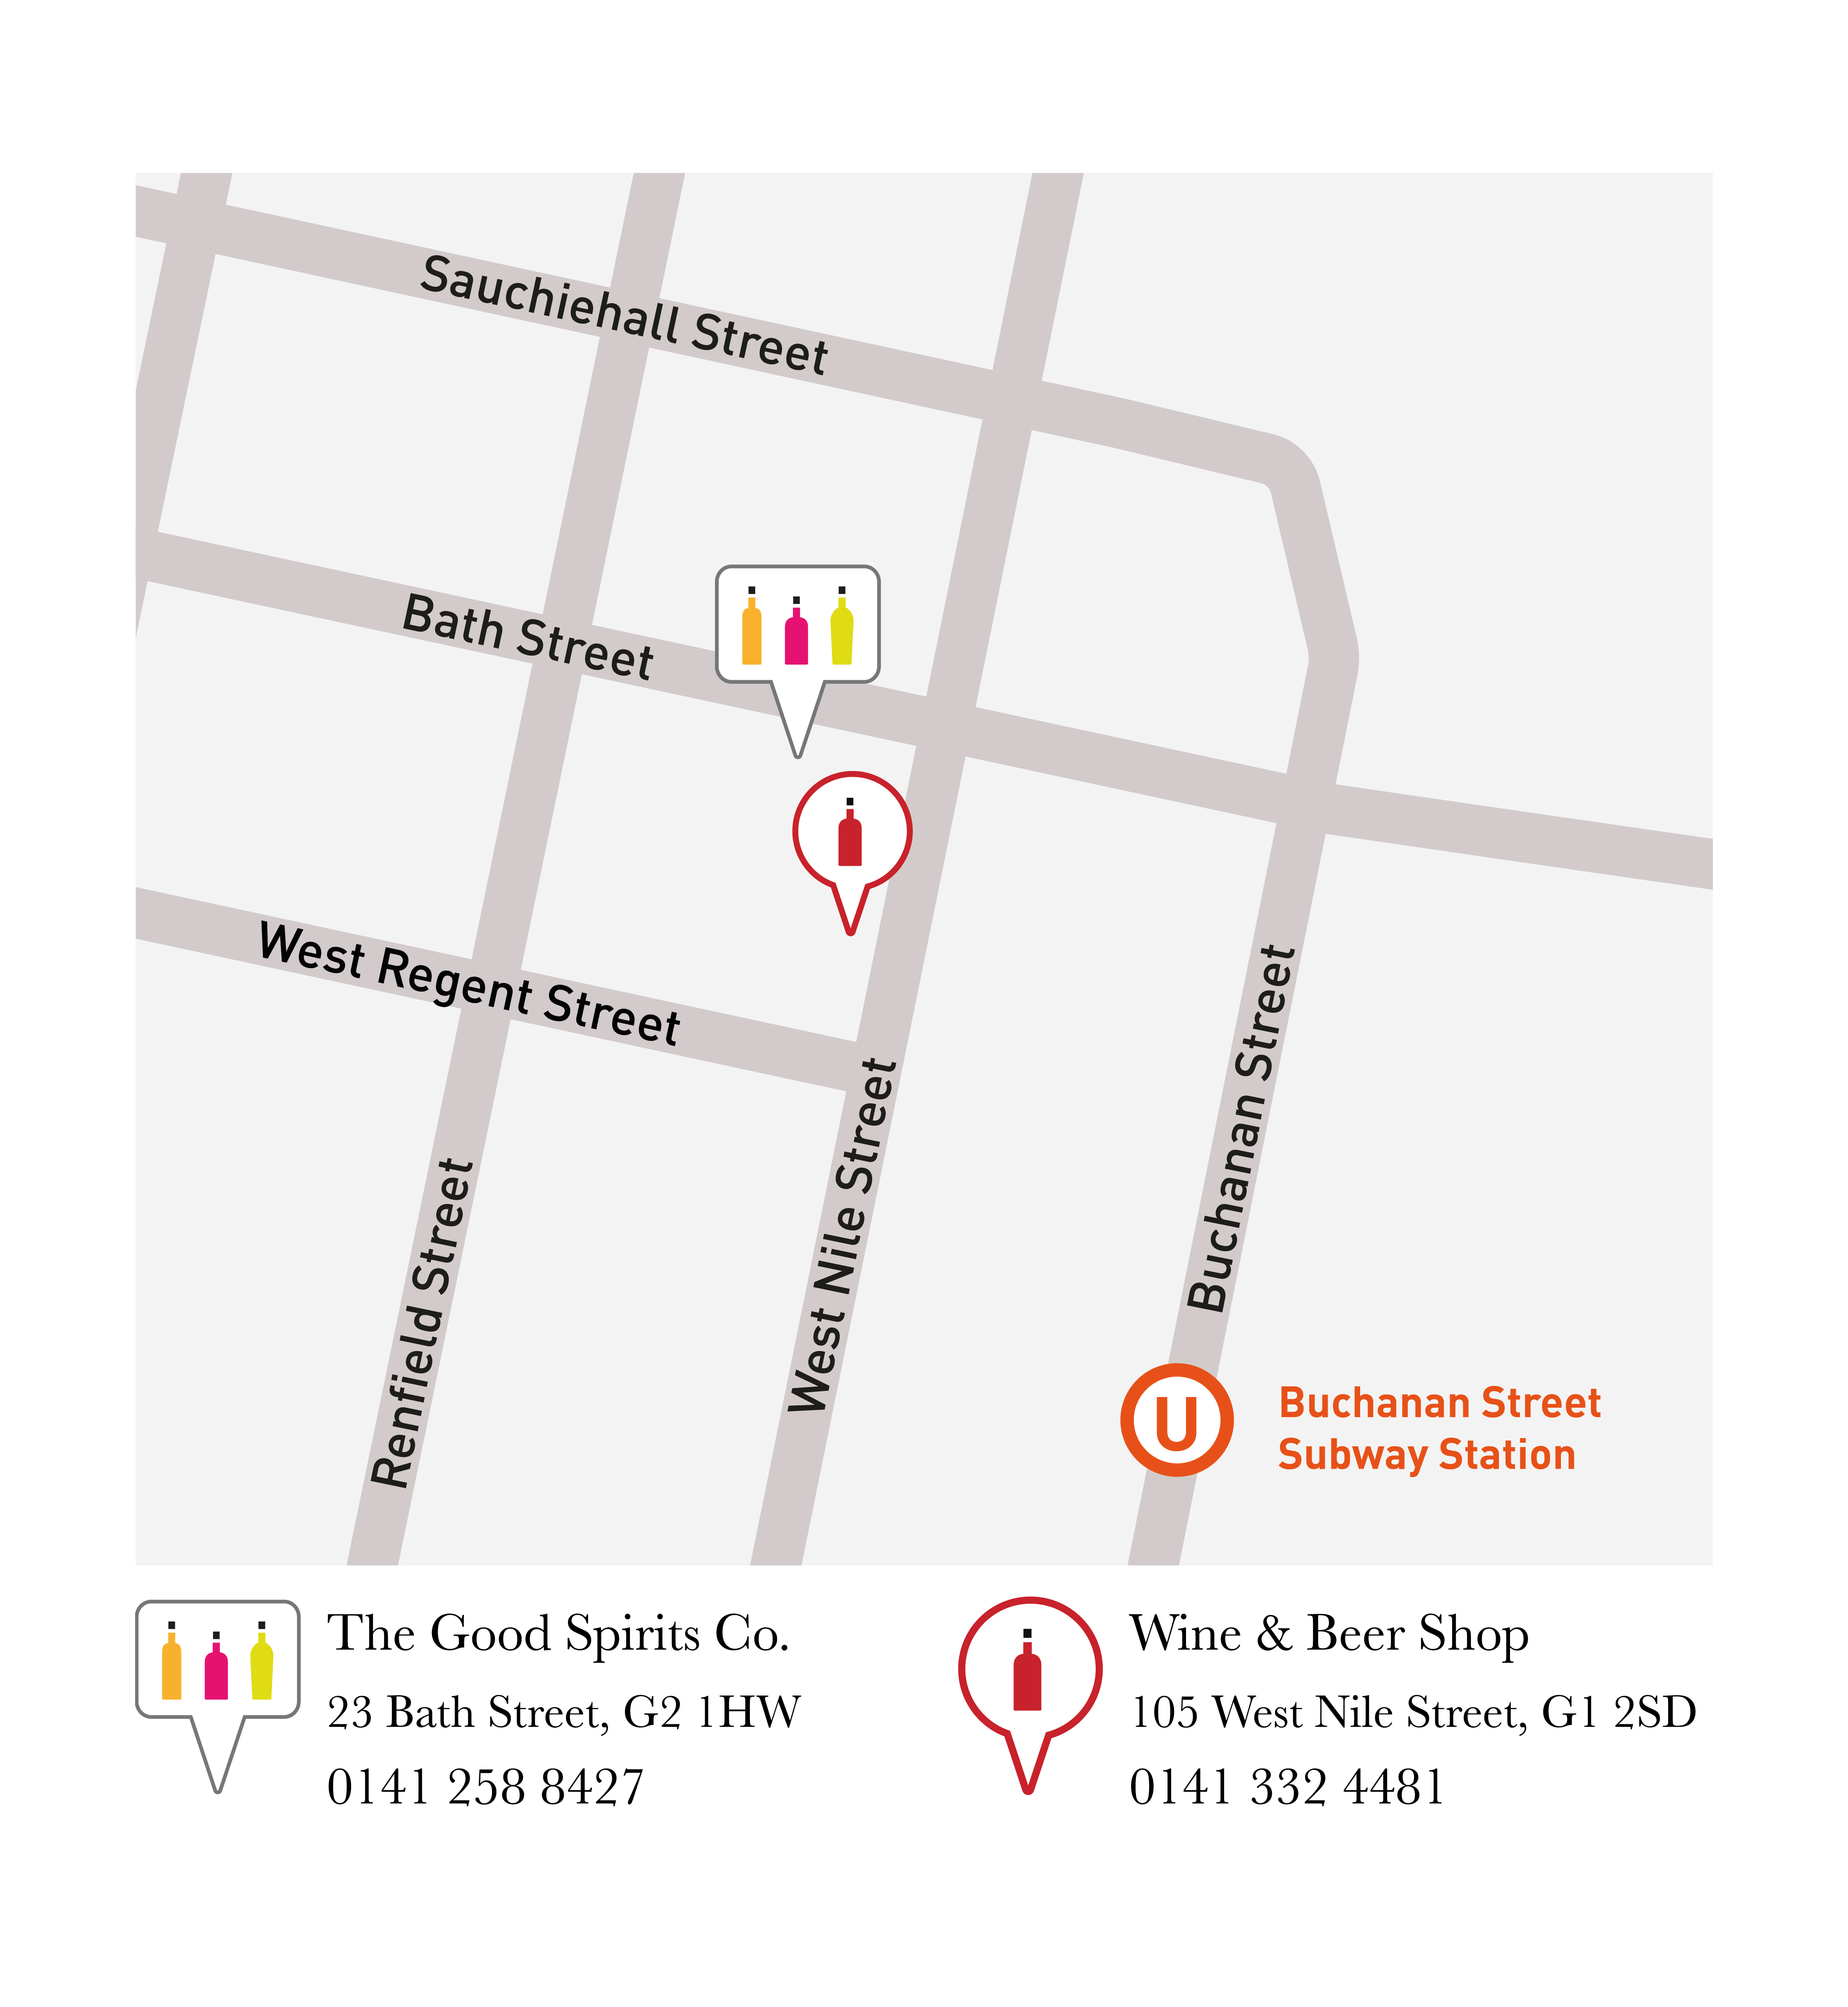 Graphical map showing the location of The Good Spirits Co. shop at 23 Bath Street and The Good Spirits Co. Wine & Beer shop at 105 West Nile Street in Glasgow, UK